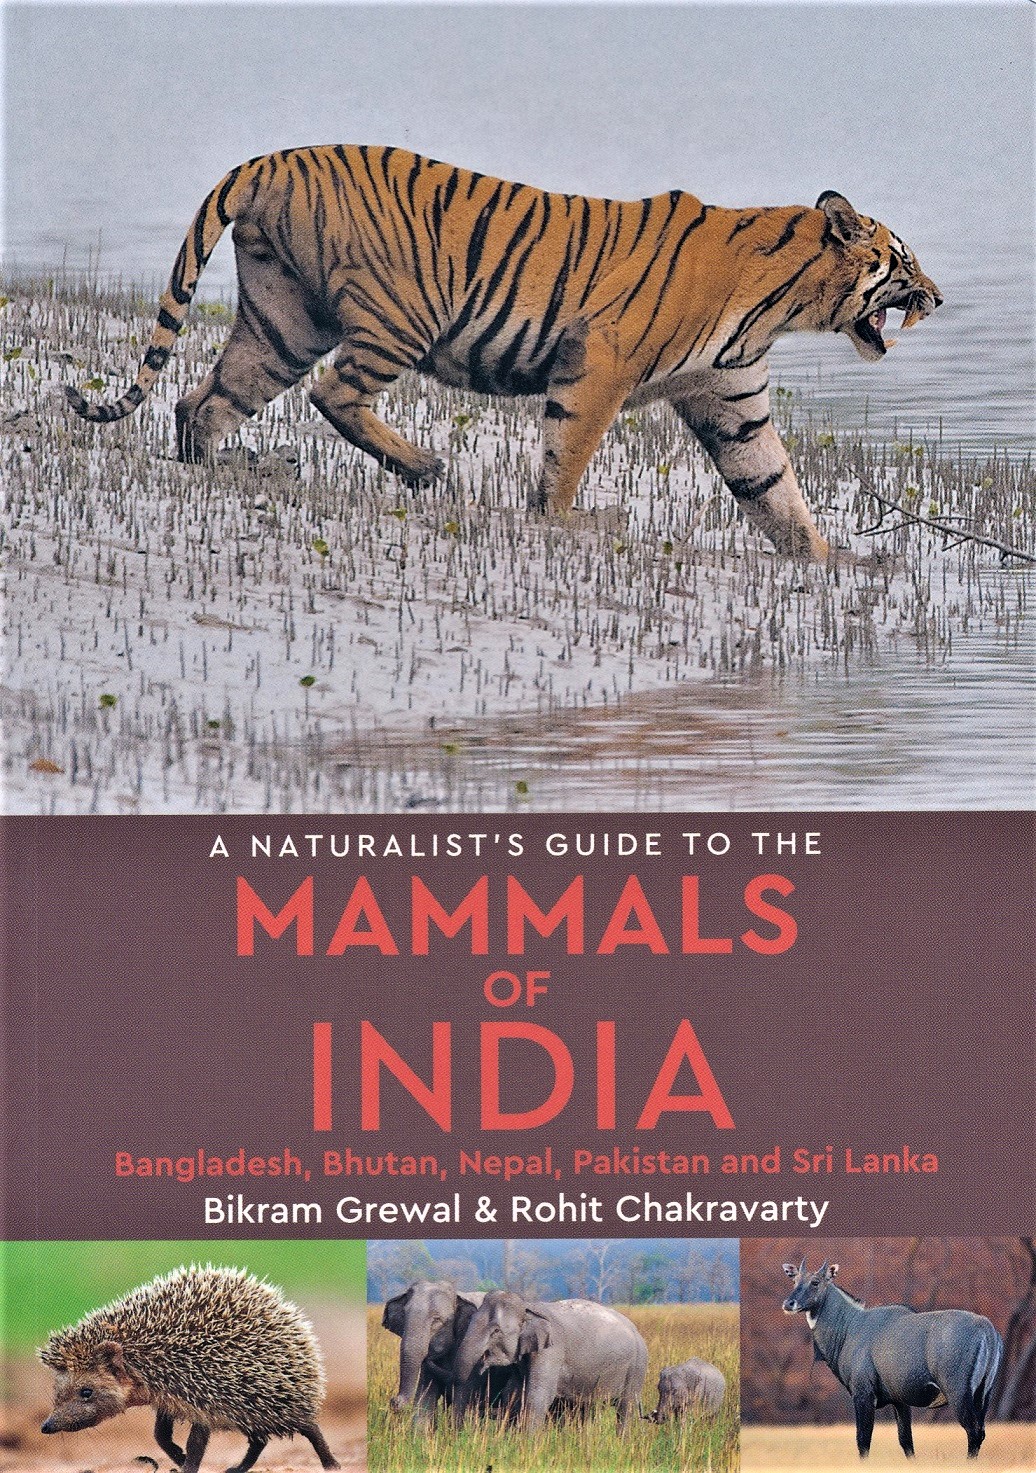 A naturalist's guide to the mammals of India 9781909612808  John Beaufoy Publications   Natuurgidsen Zuid-Azië